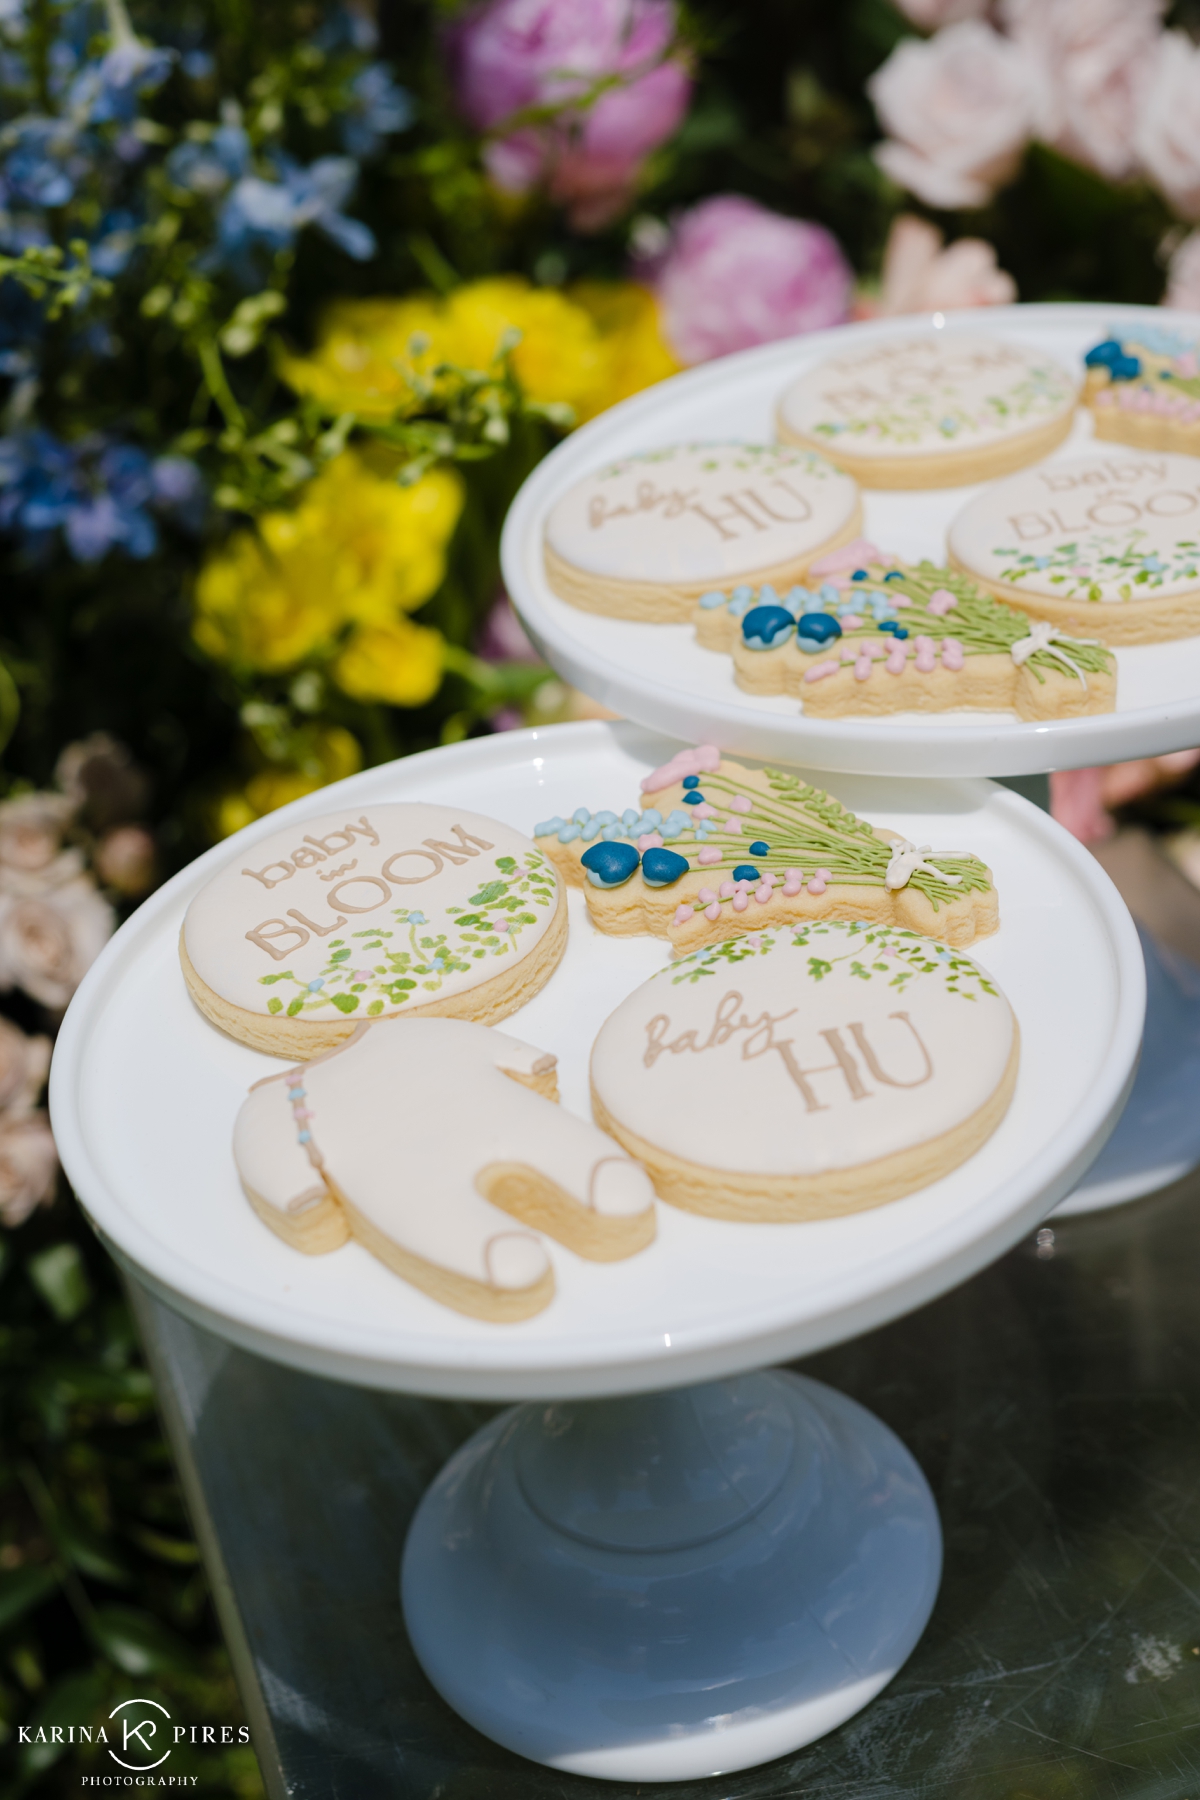 Custom icing sugar cookies for a baby shower